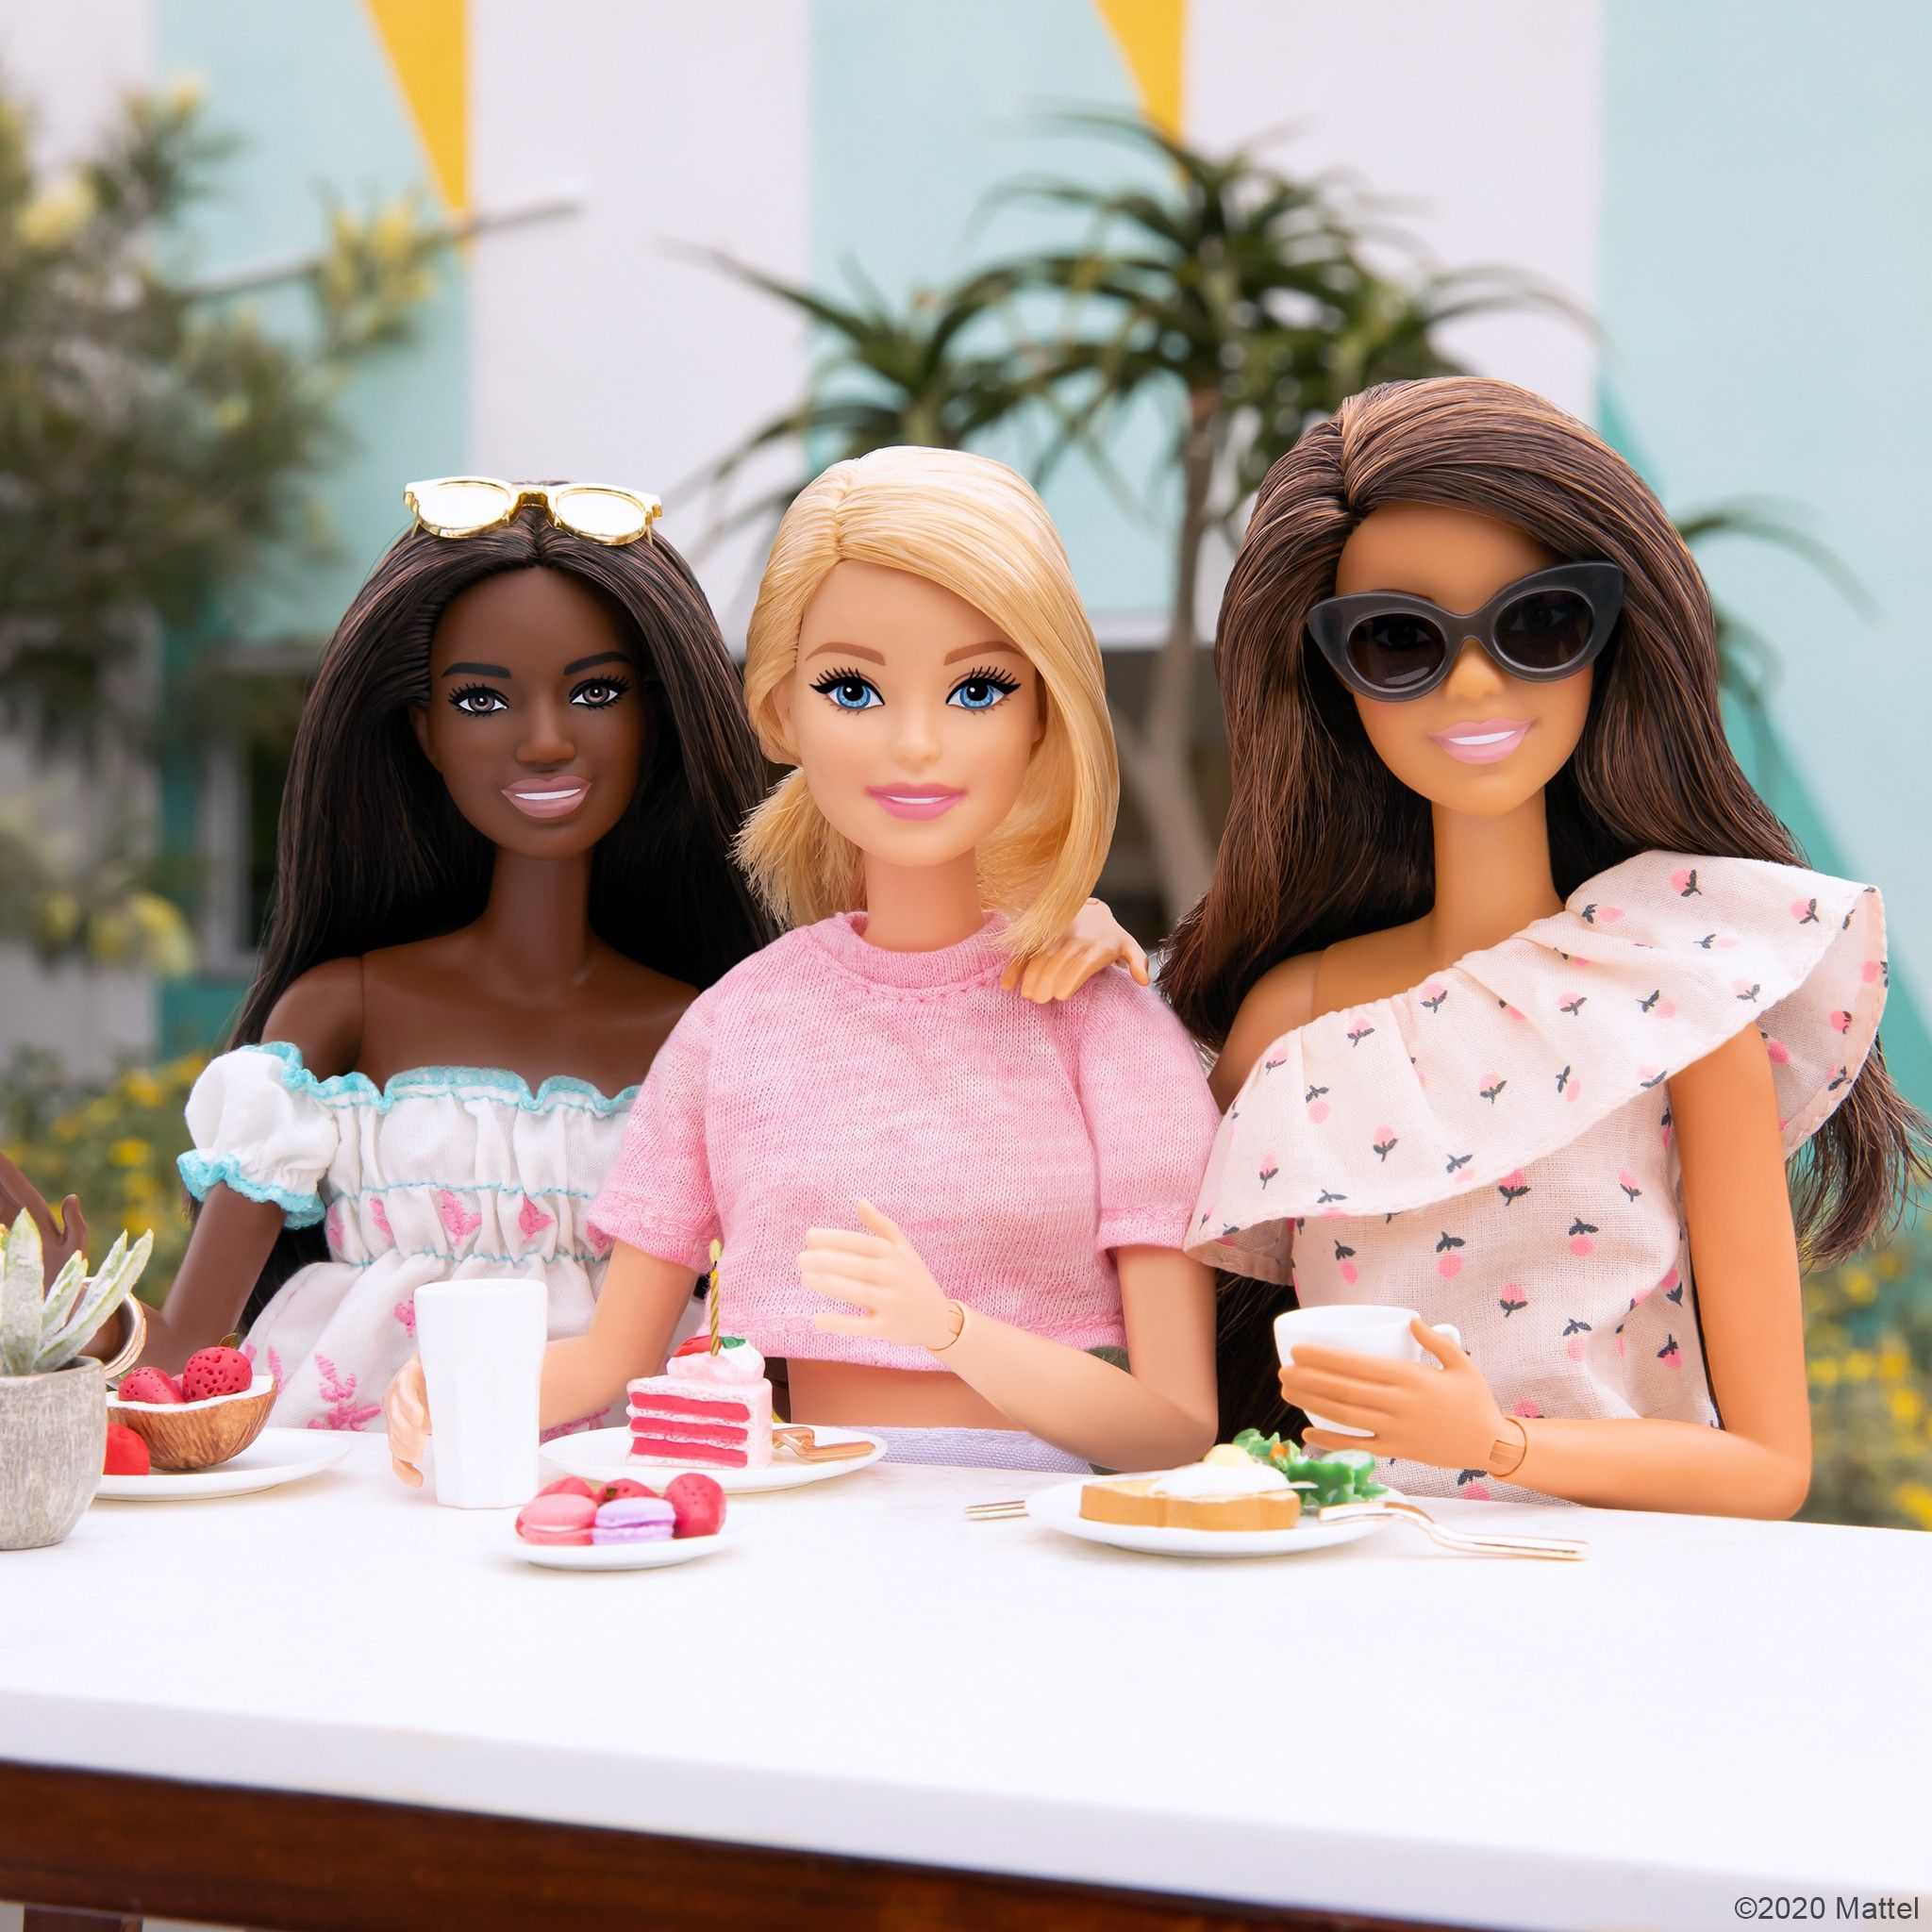 BTW, ​You Can *Actually* Visit the Malibu Barbie Cafe